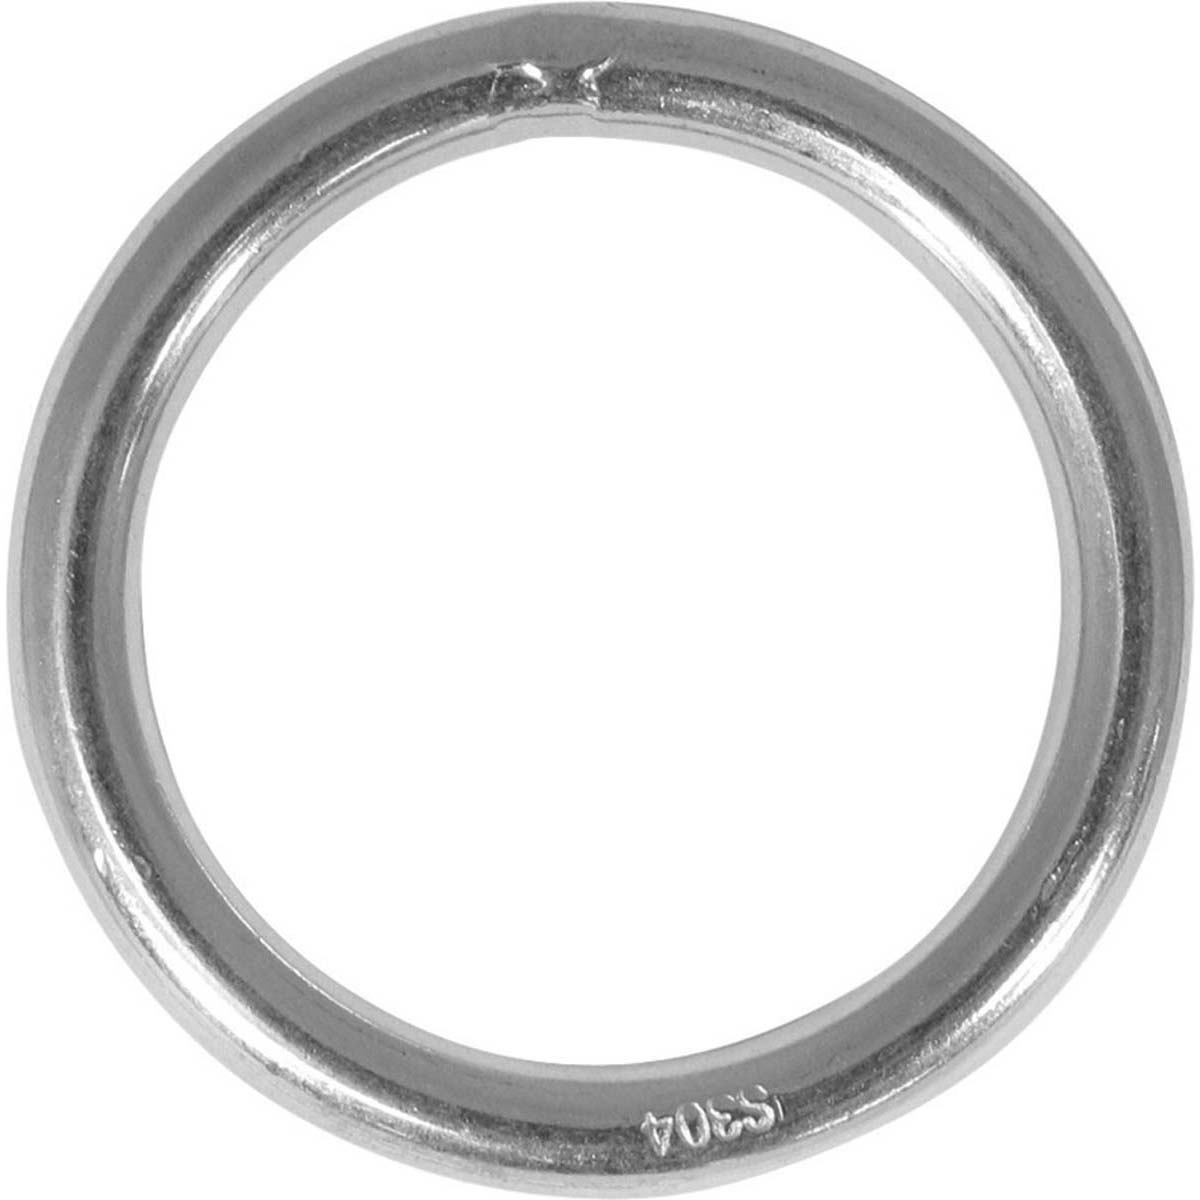 Blueline Stainless Steel Ring 8x75mm